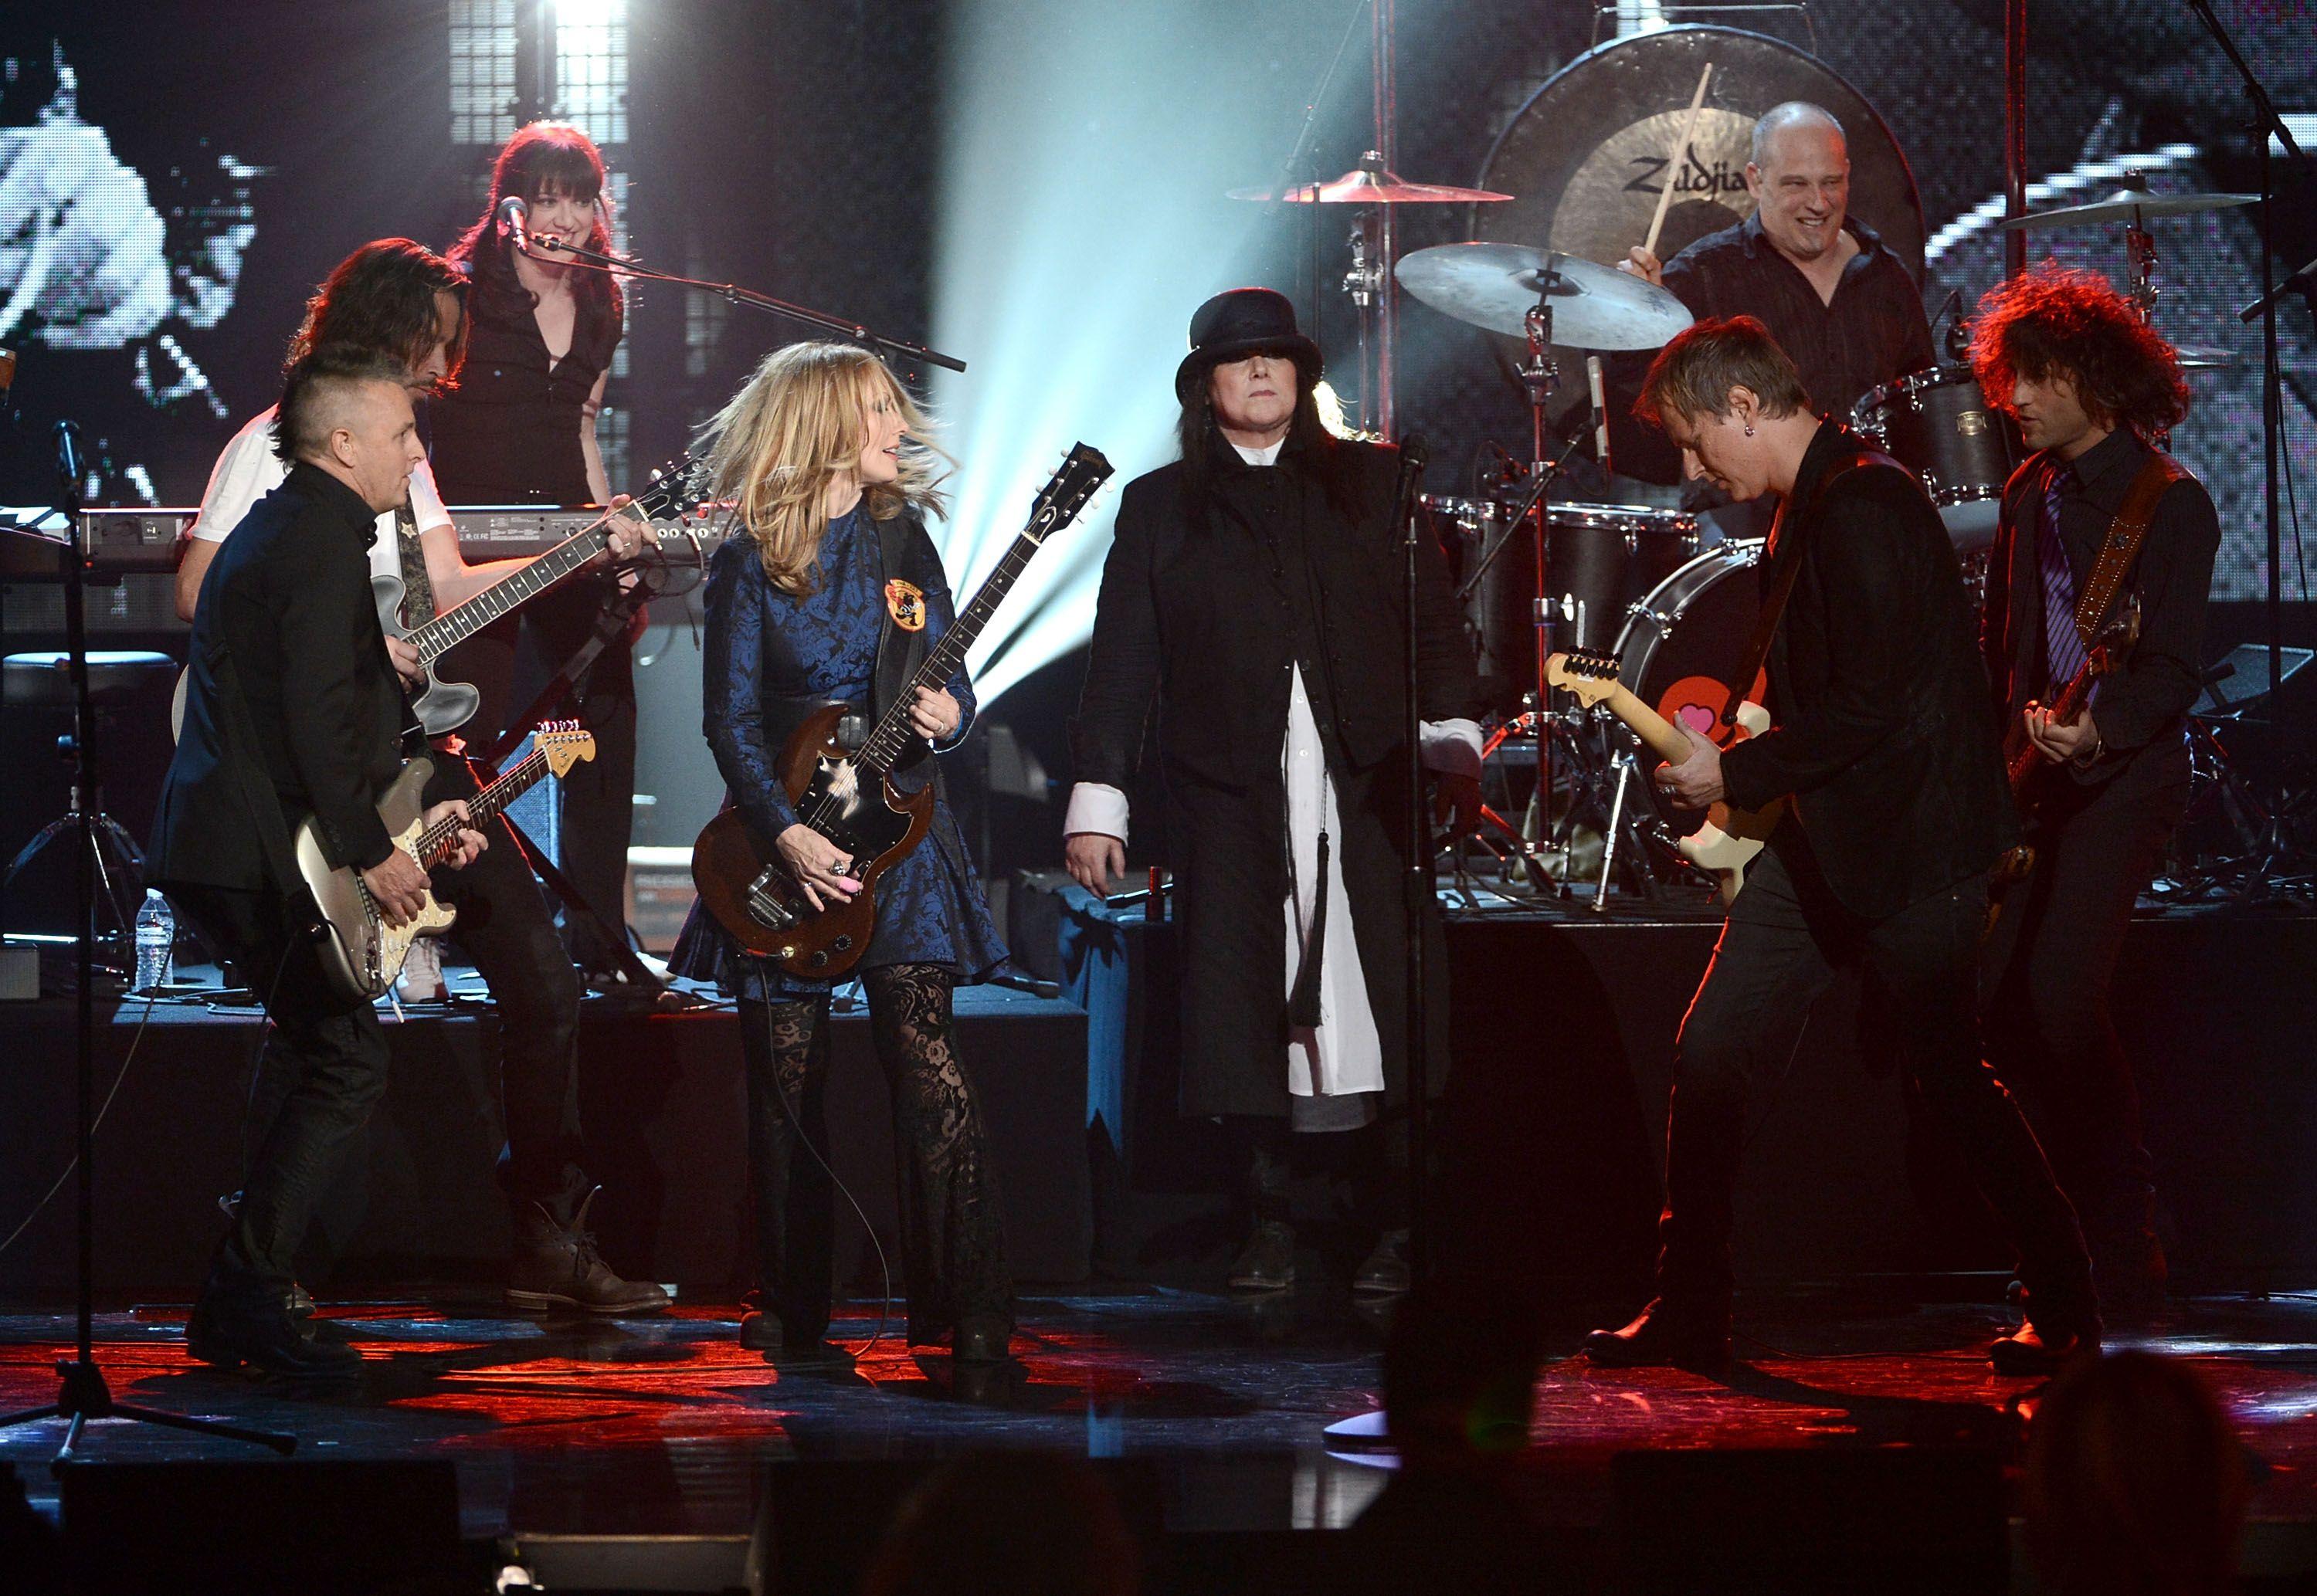 Rock Hall 2013 Induction Ceremony Recap 5 Highlights From This